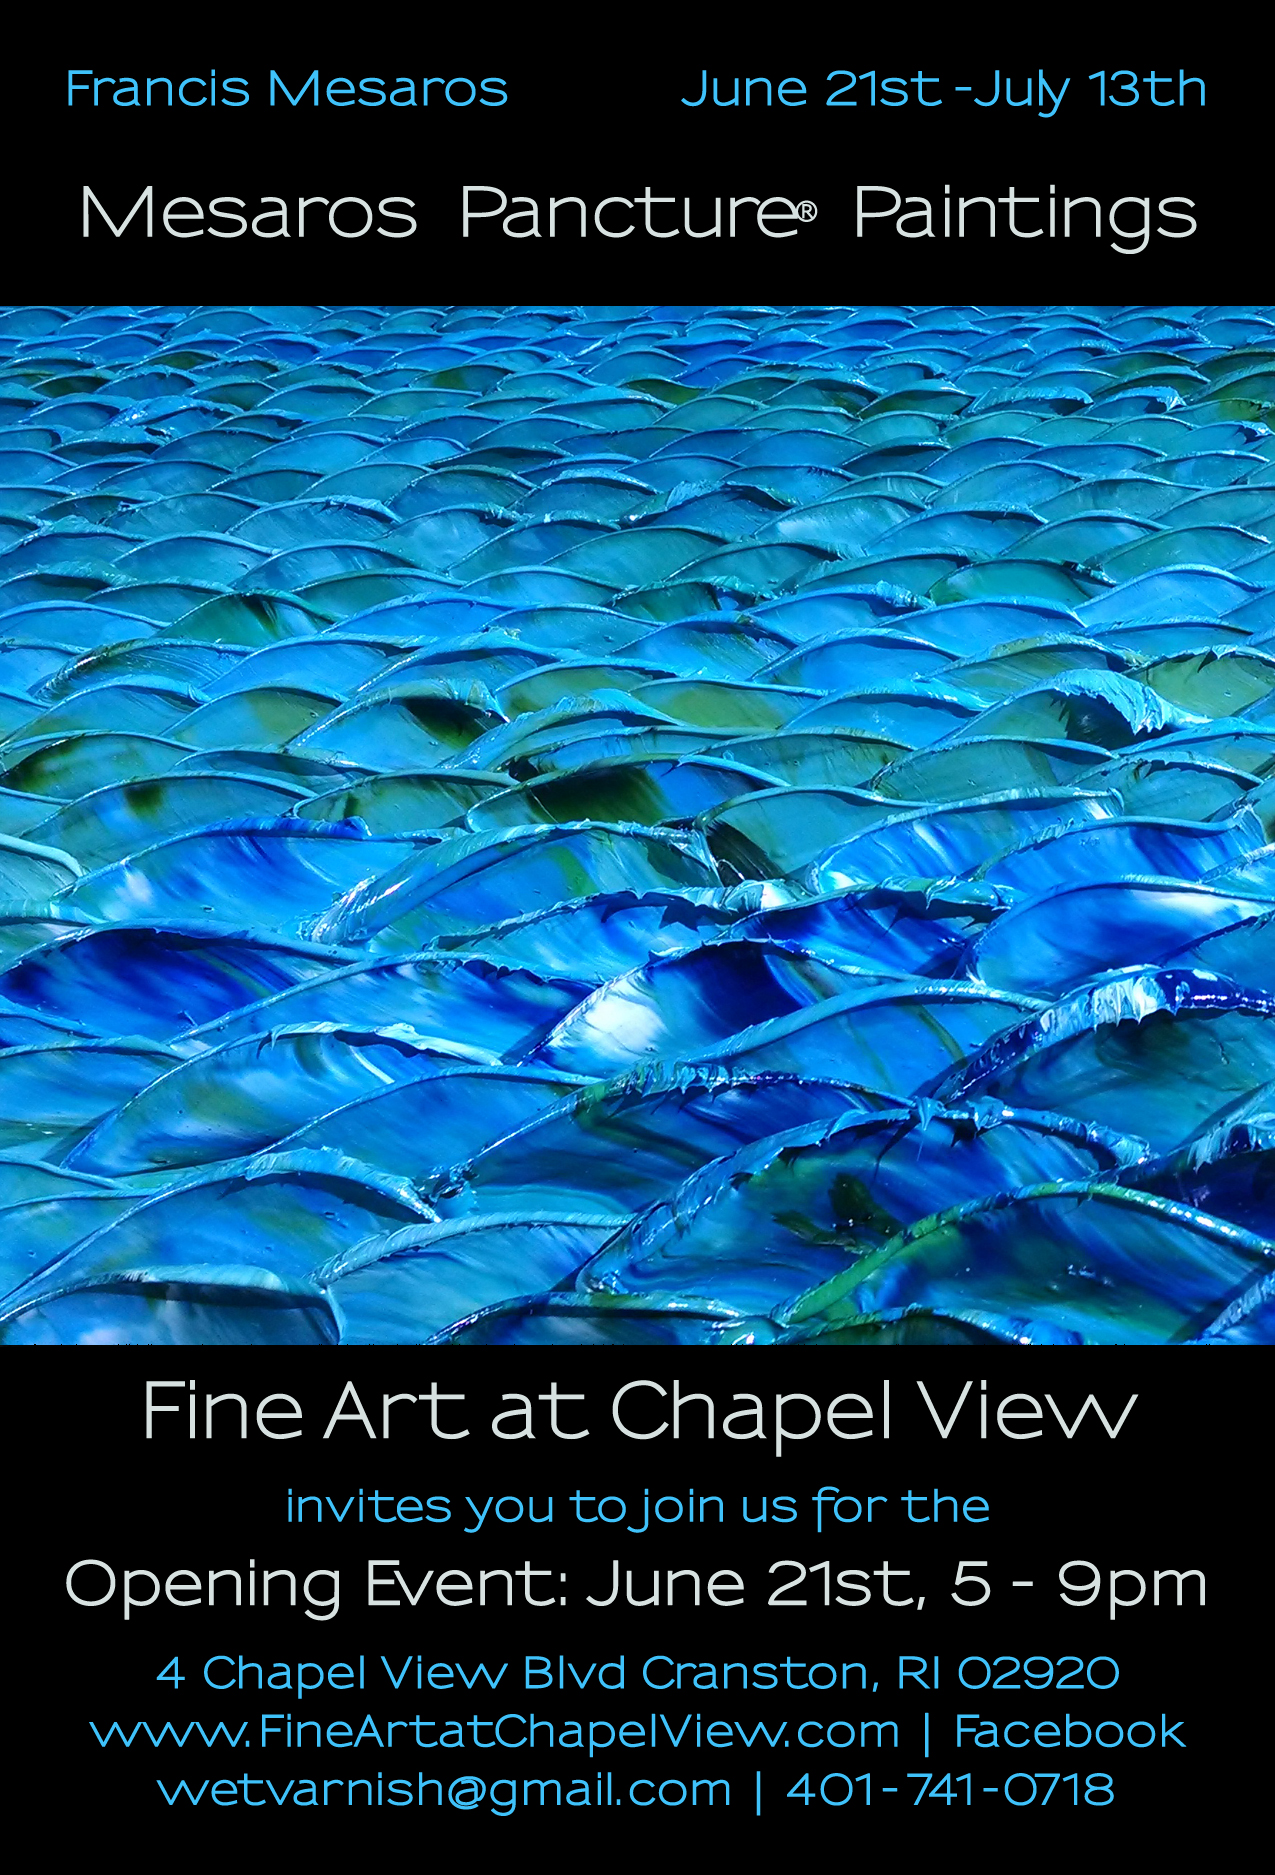 Fine Art at Chapel View Presents Francis Mesaros Pancture® Paintings